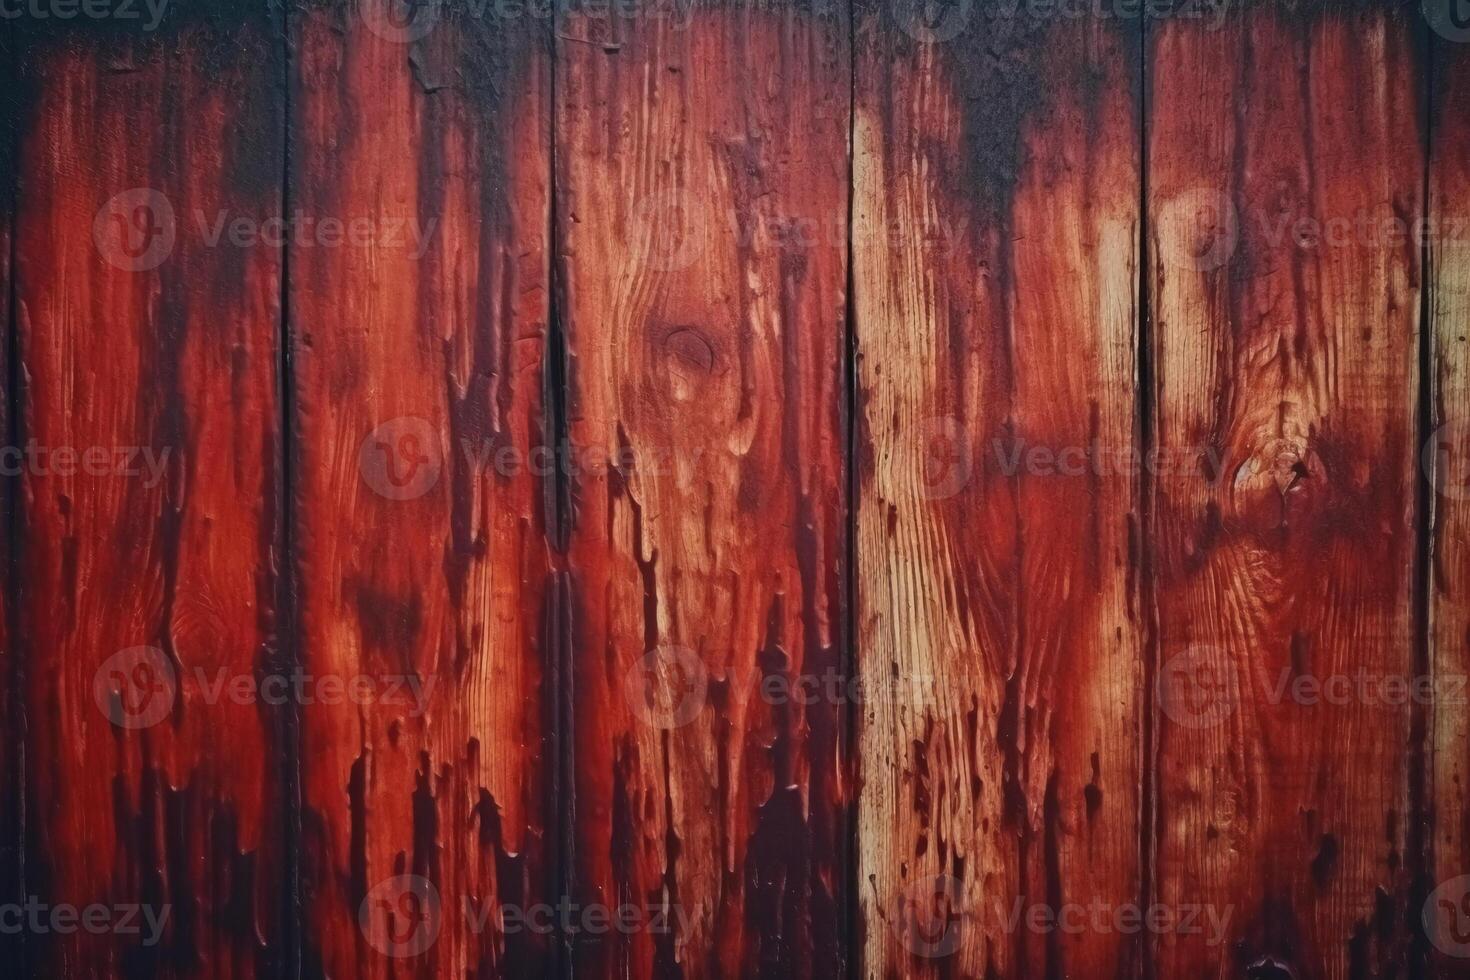 Horror wood blood stain background, grunge rough wooden plank wallpaper. photo